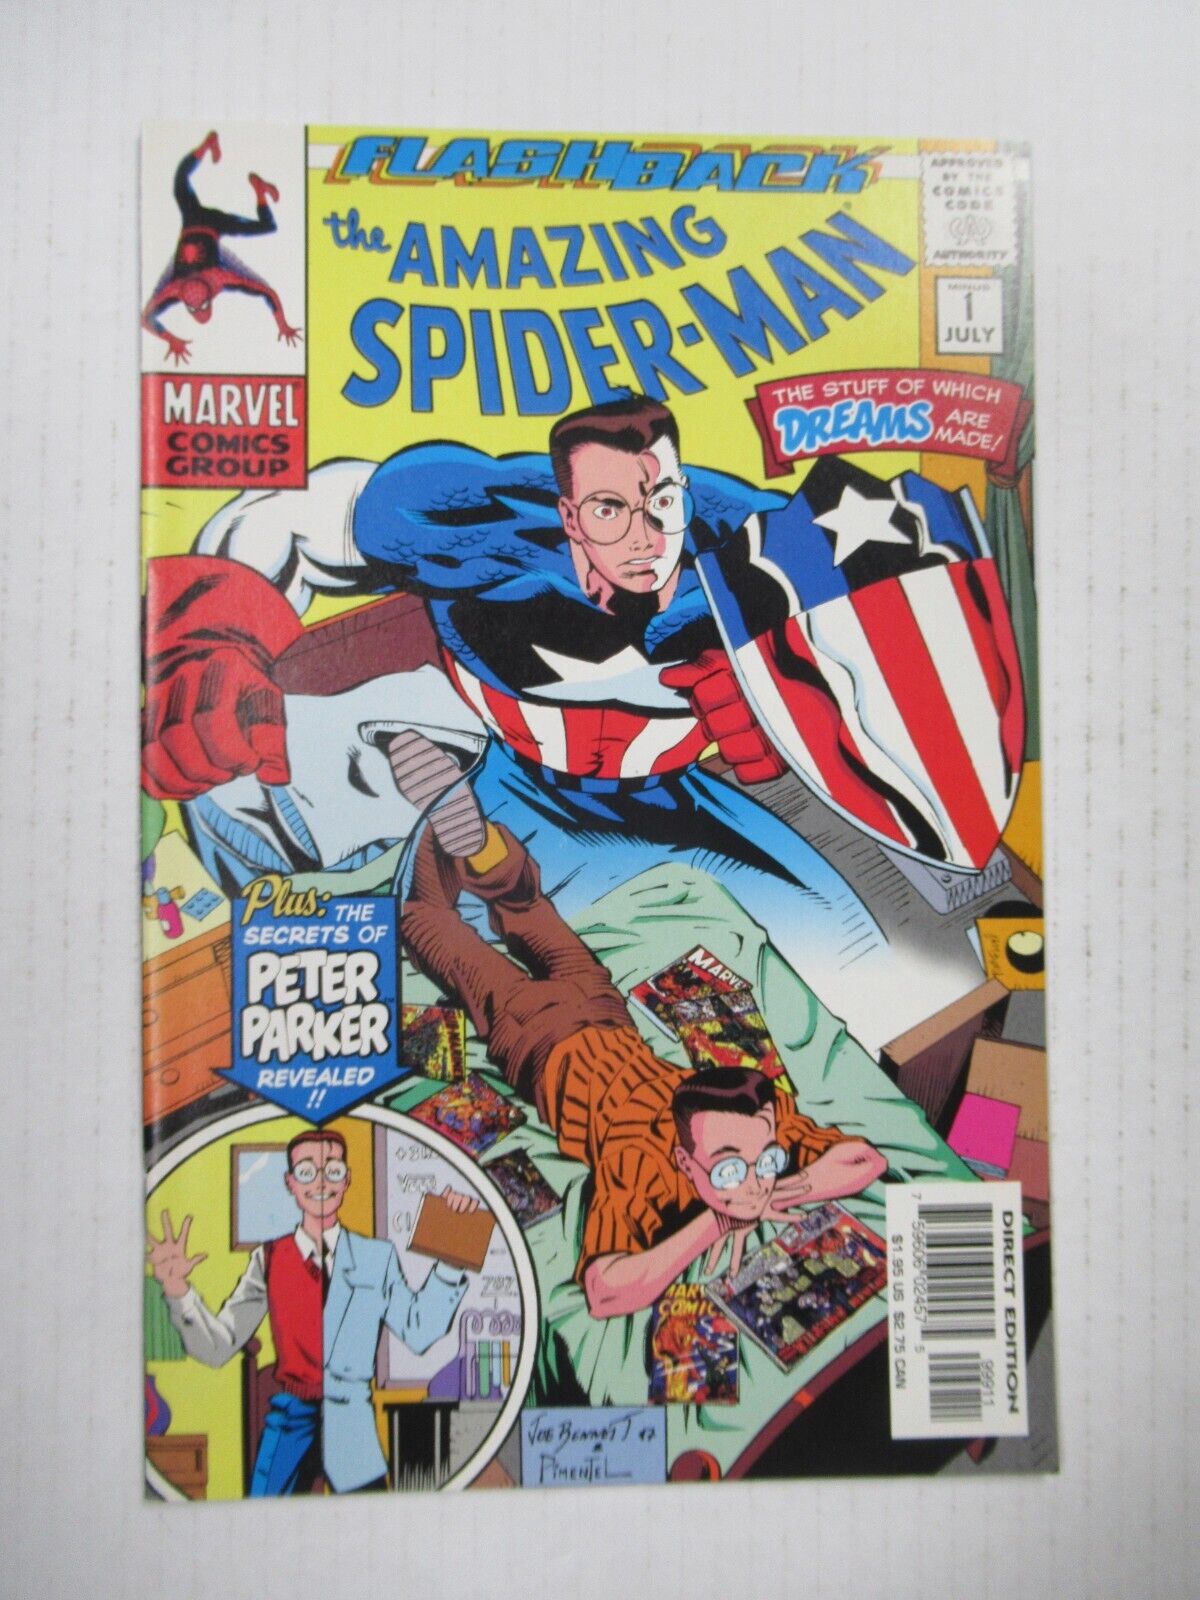 1997 Flashback The Amazing Spider-Man #1 The Stuff Of Which Dreams Are Made